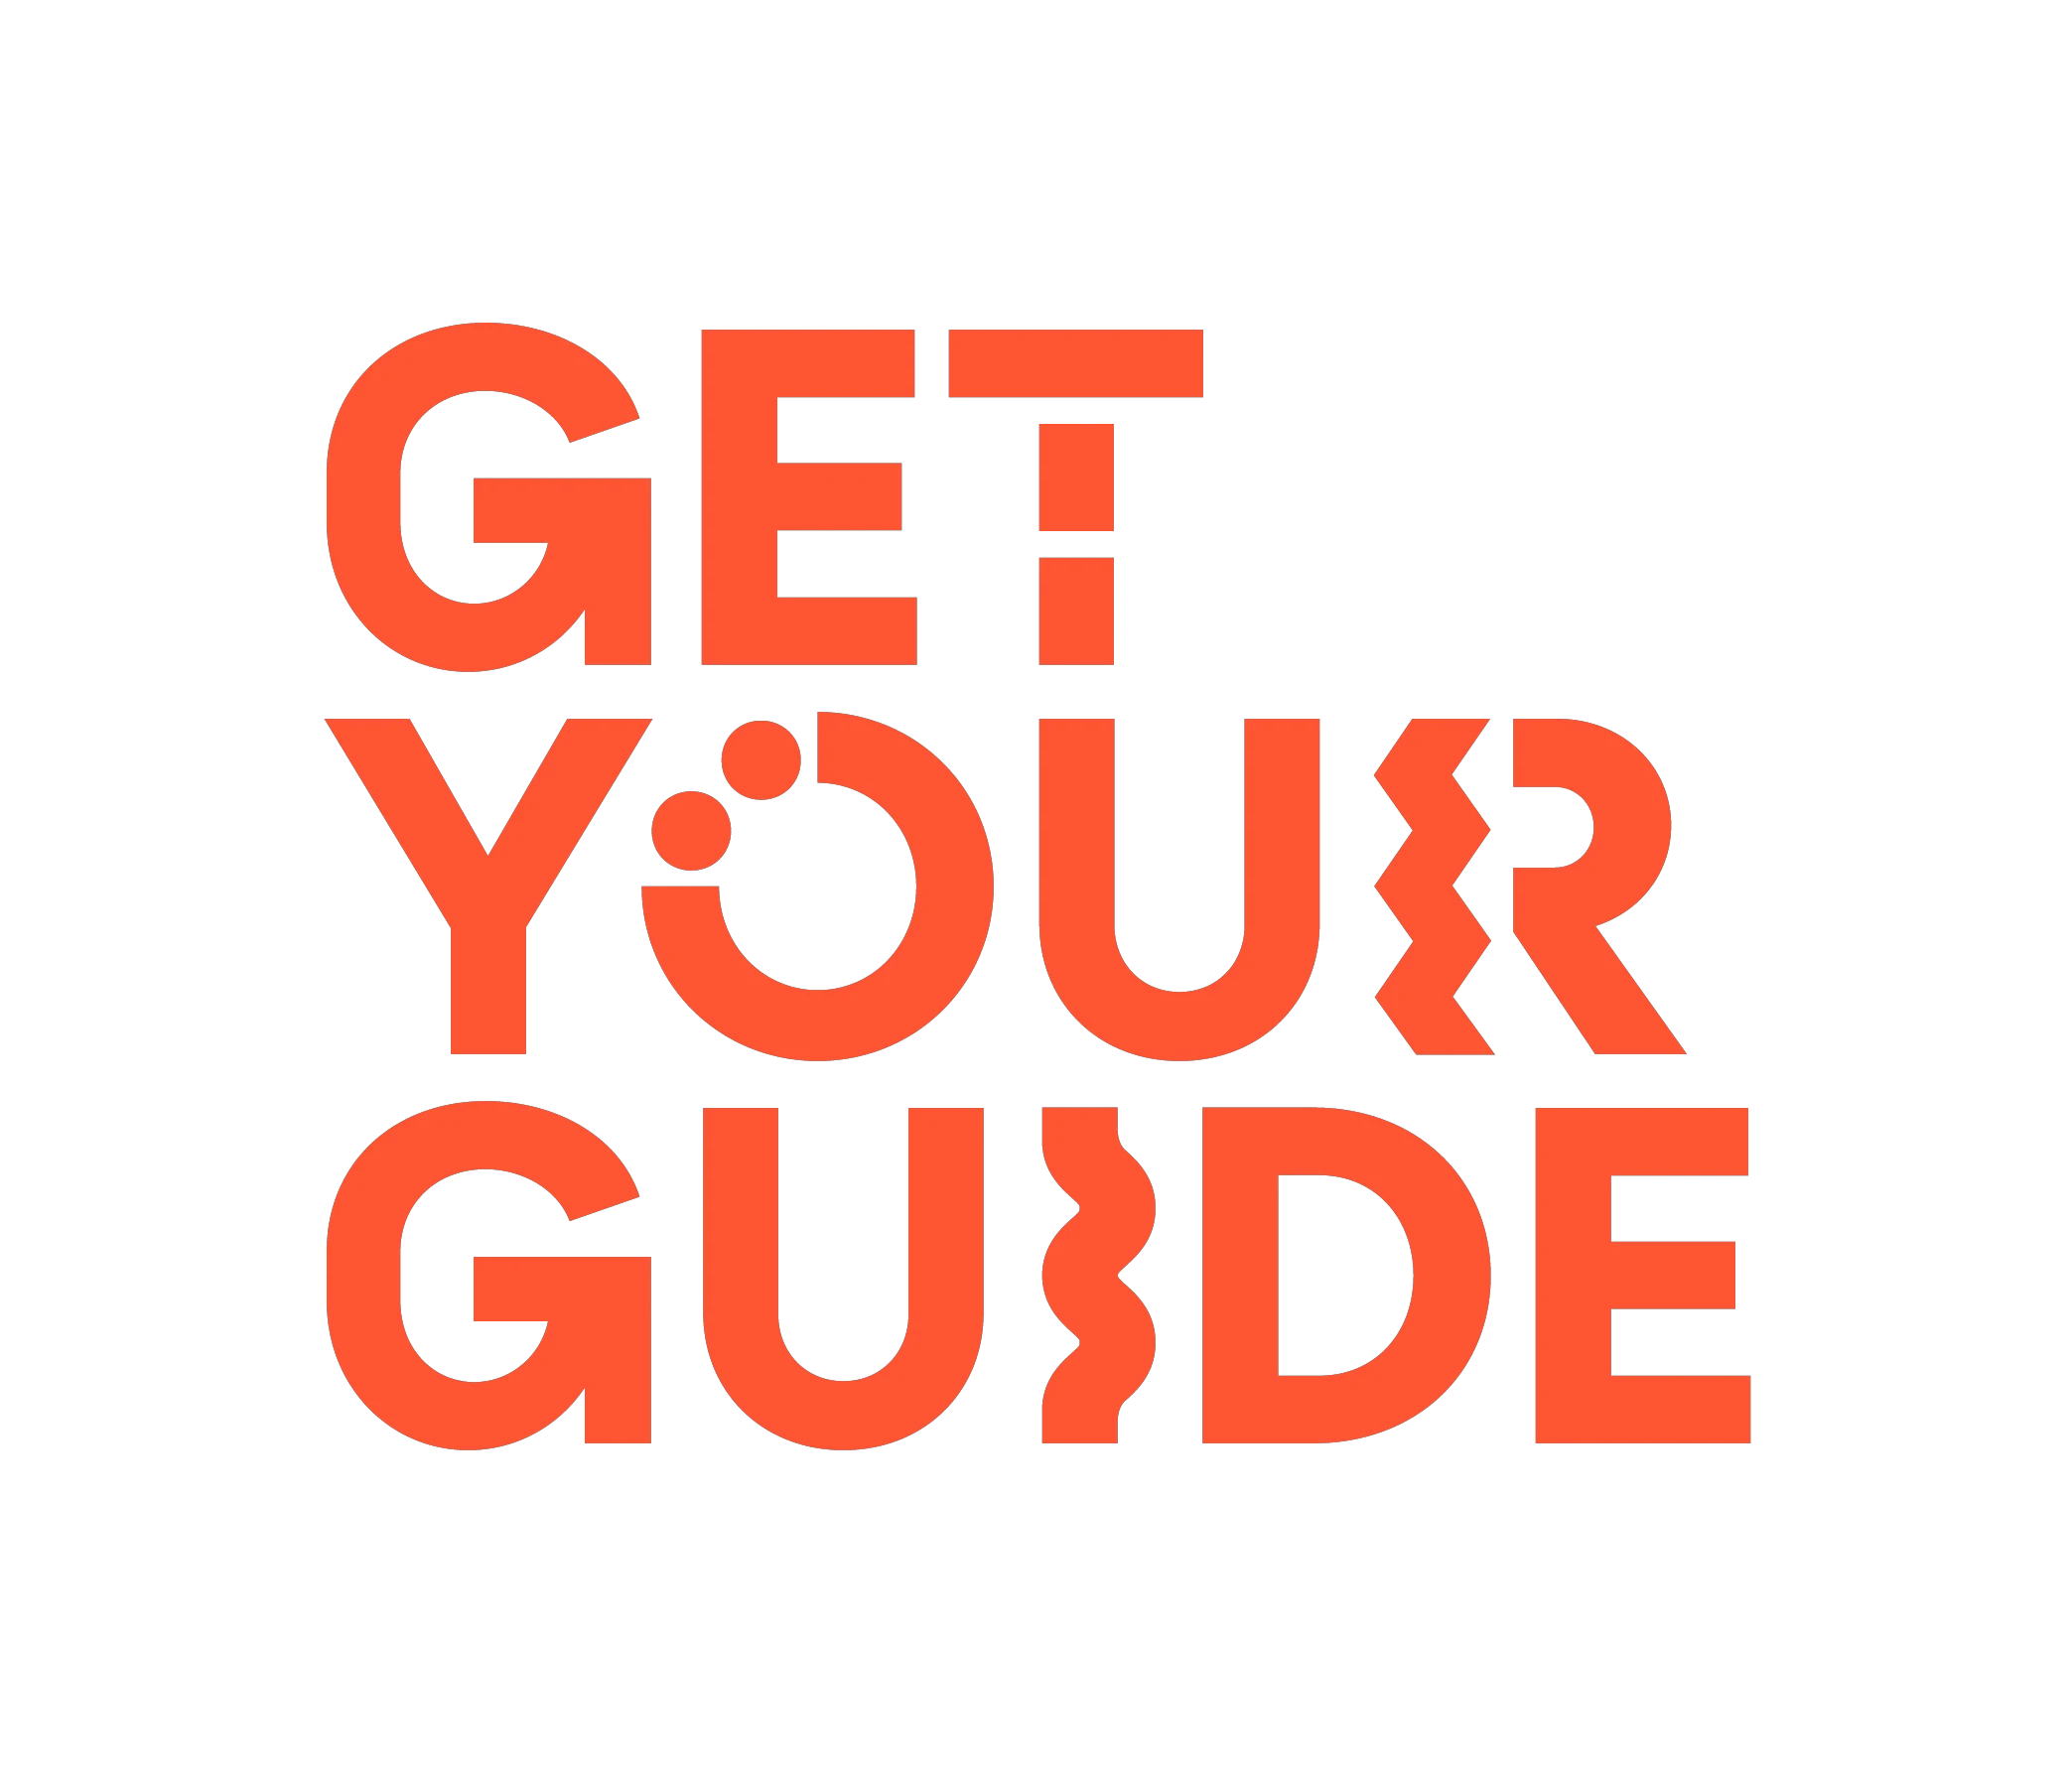 GetYourGuide Cupones 